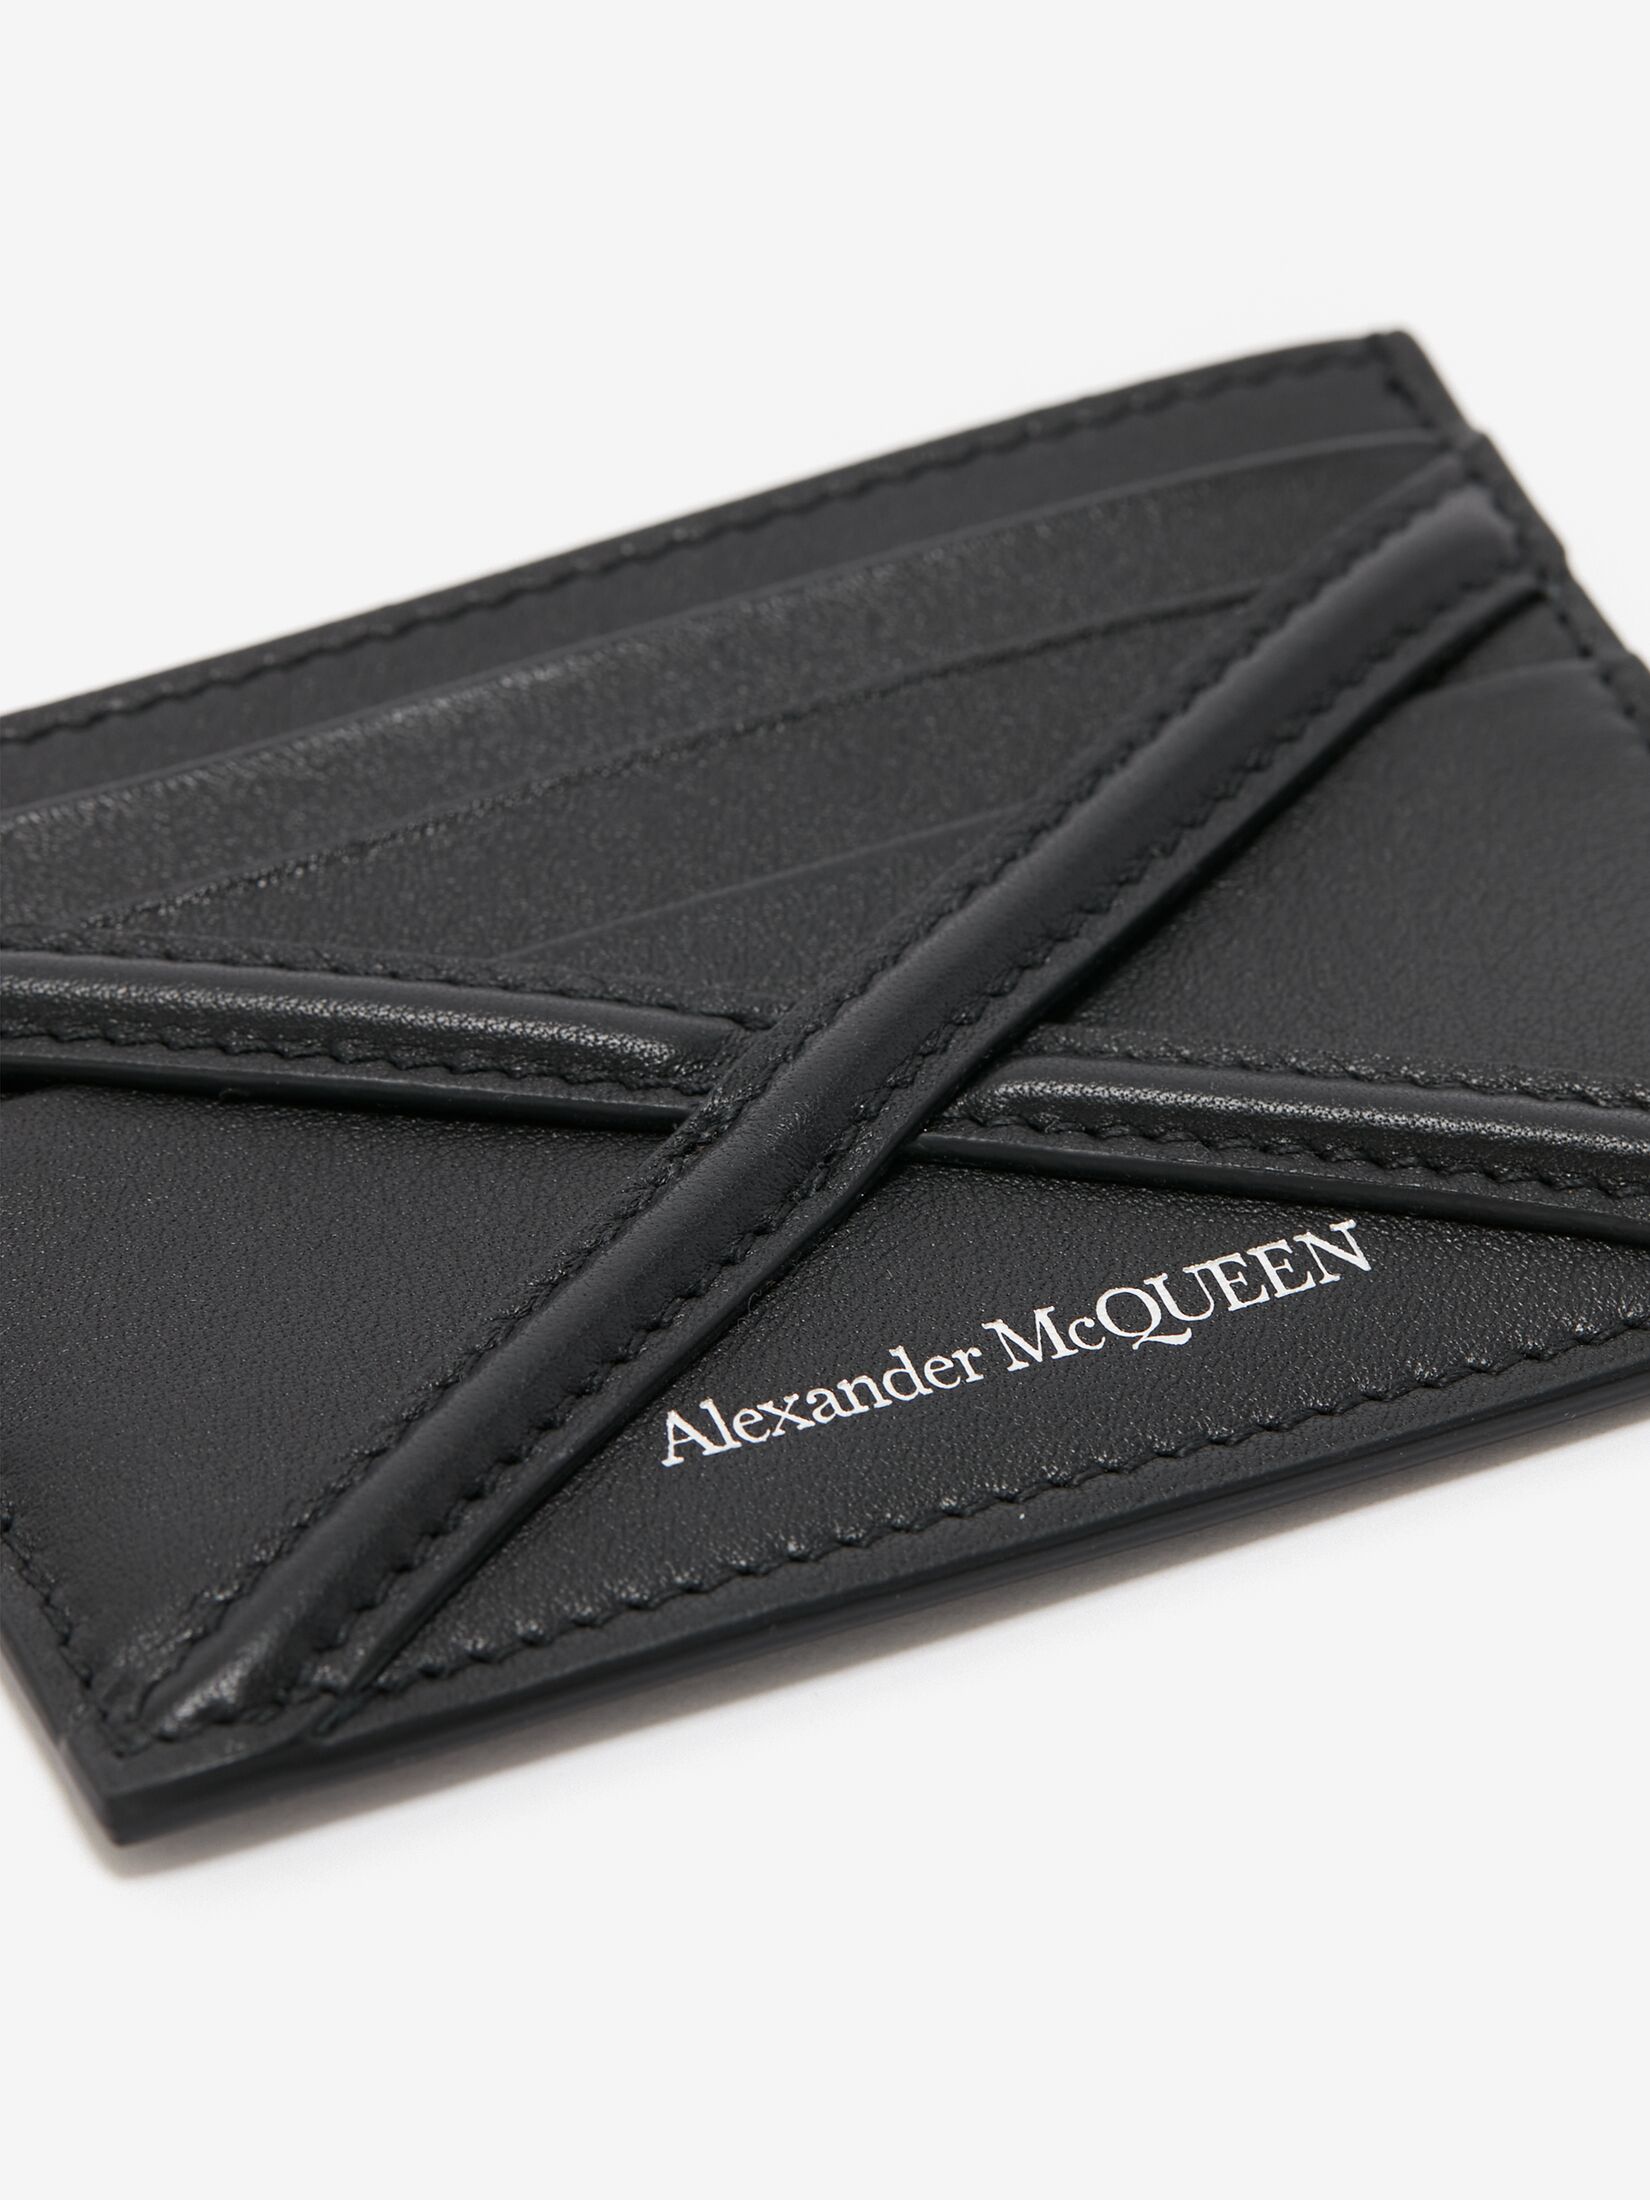 The Harness card holder